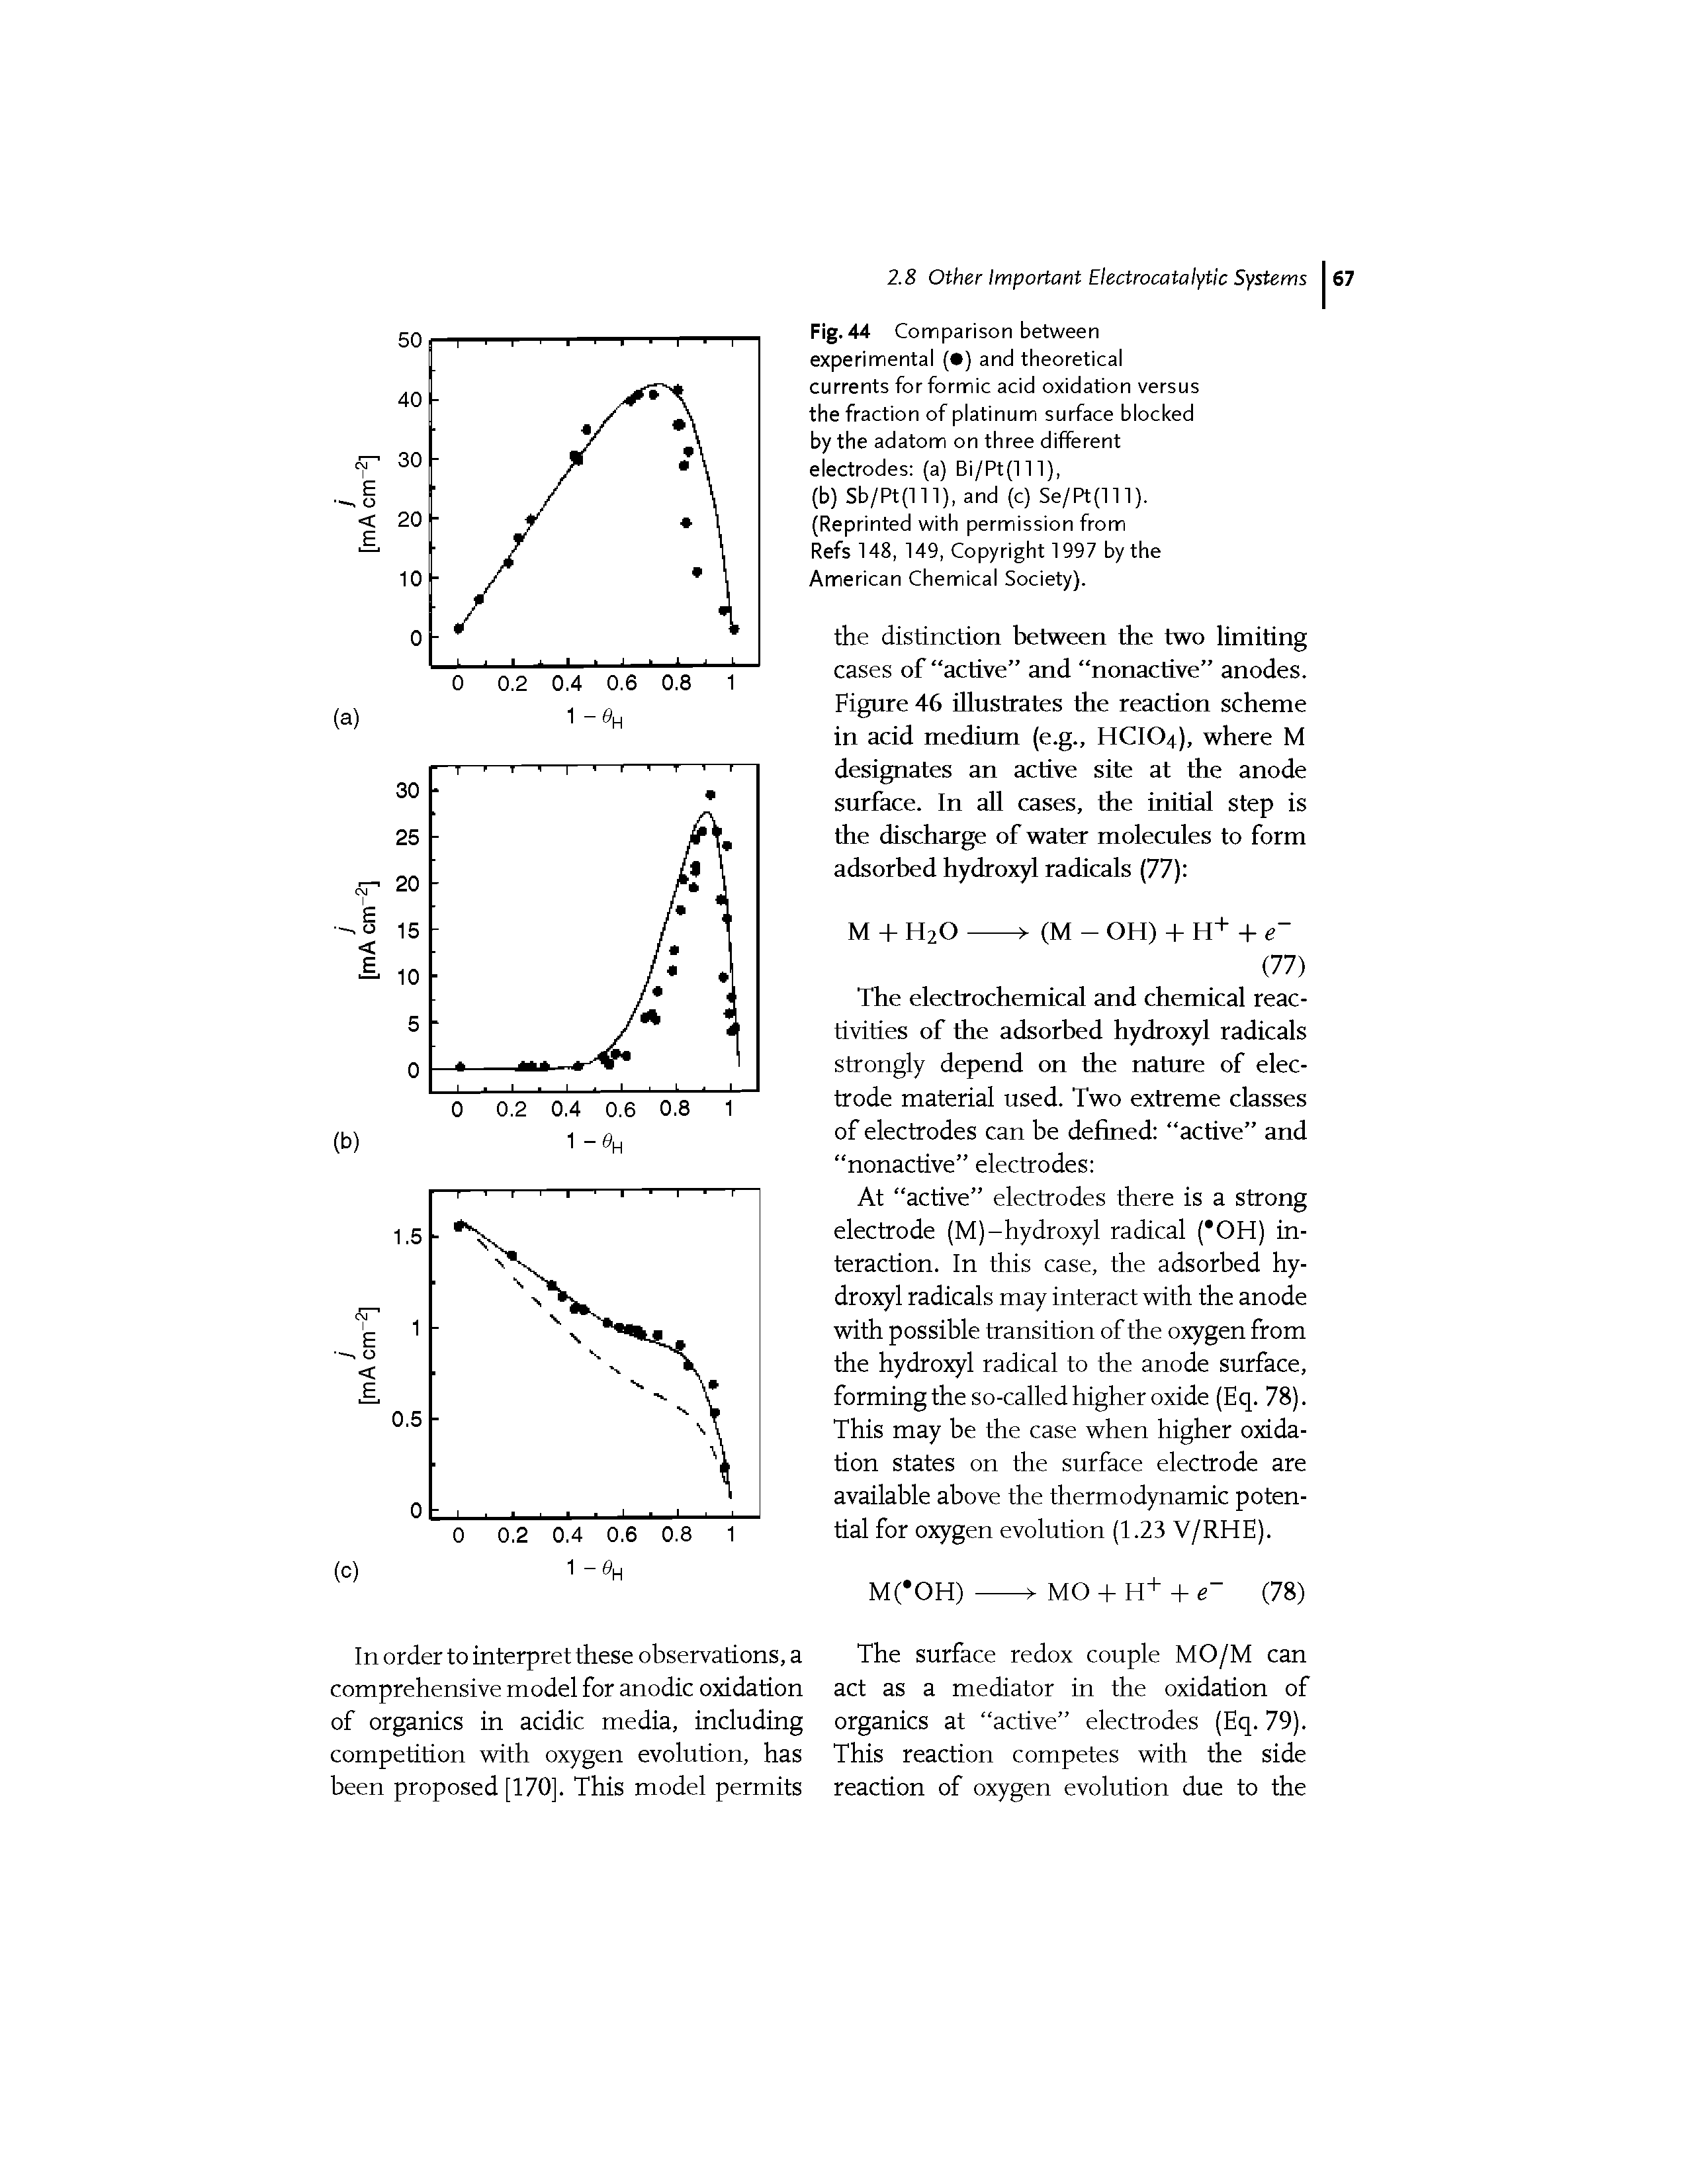 Fig. 44 Comparison between experimental ( ) and theoretical currents for formic acid oxidation versus the fraction of platinum surface blocked by the adatom on three different electrodes (a) Bi/Pt(lll),...